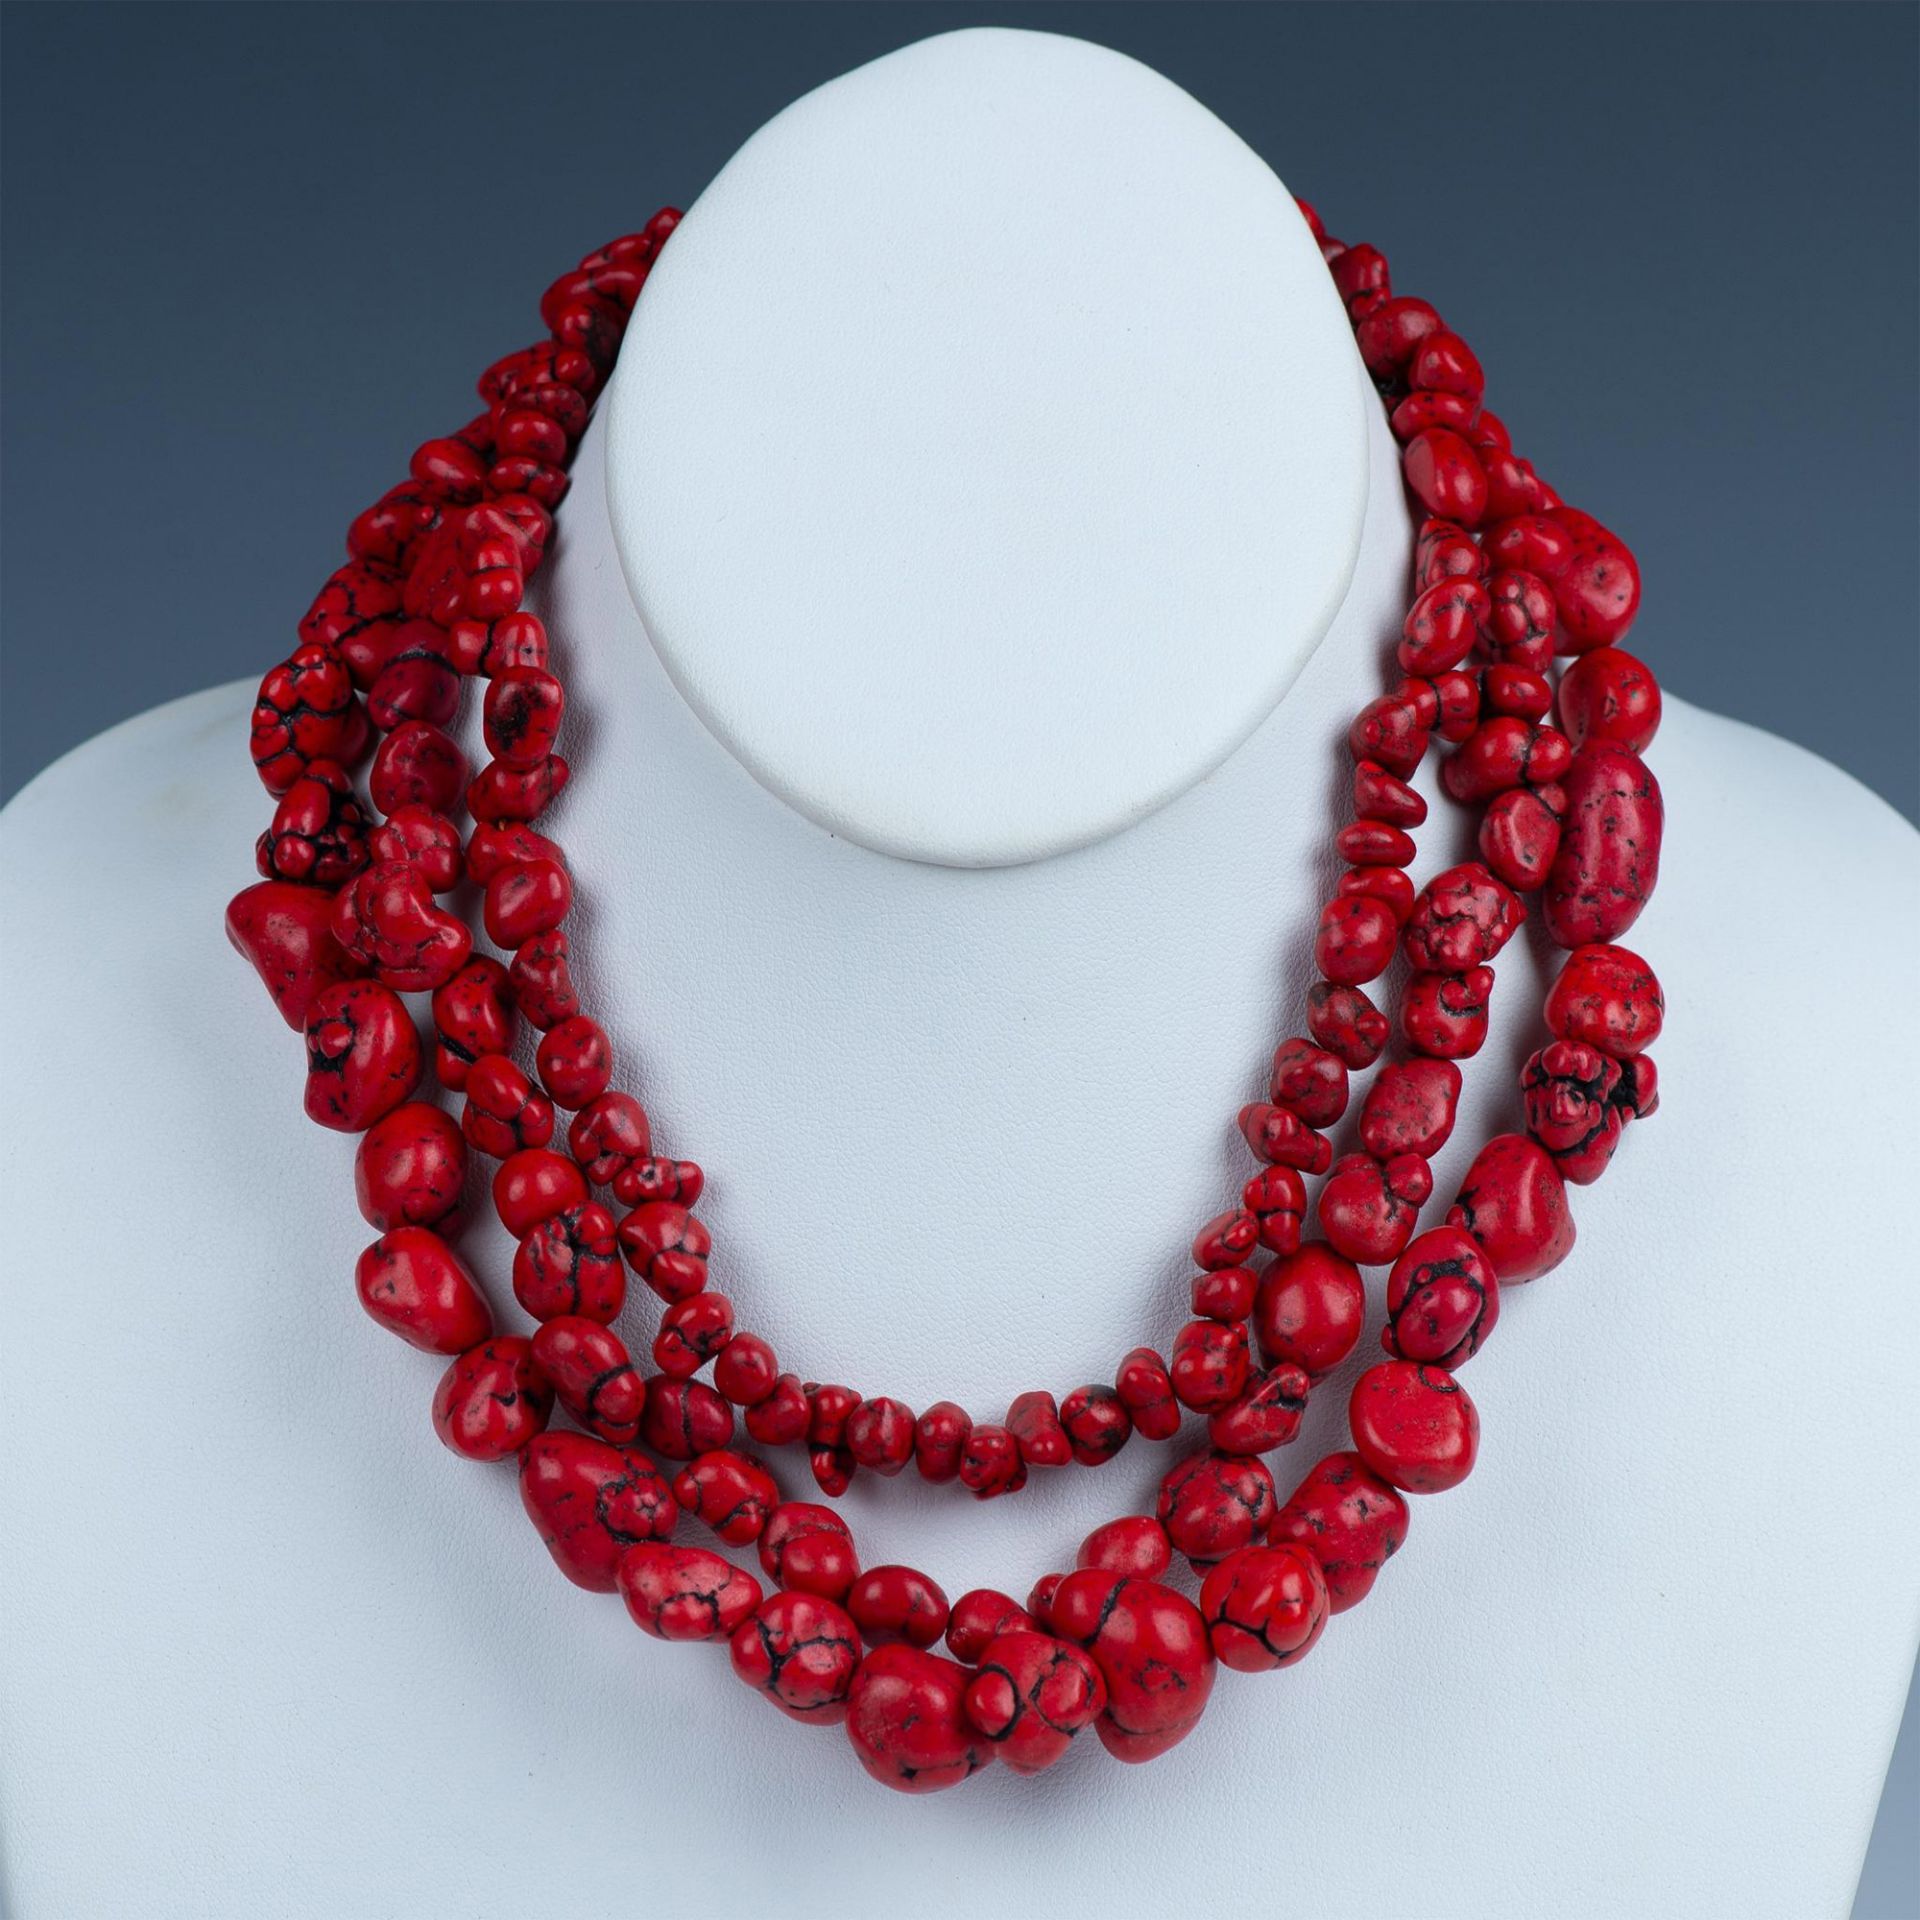 Bright Three-Strand Red Stone Necklace - Image 2 of 6